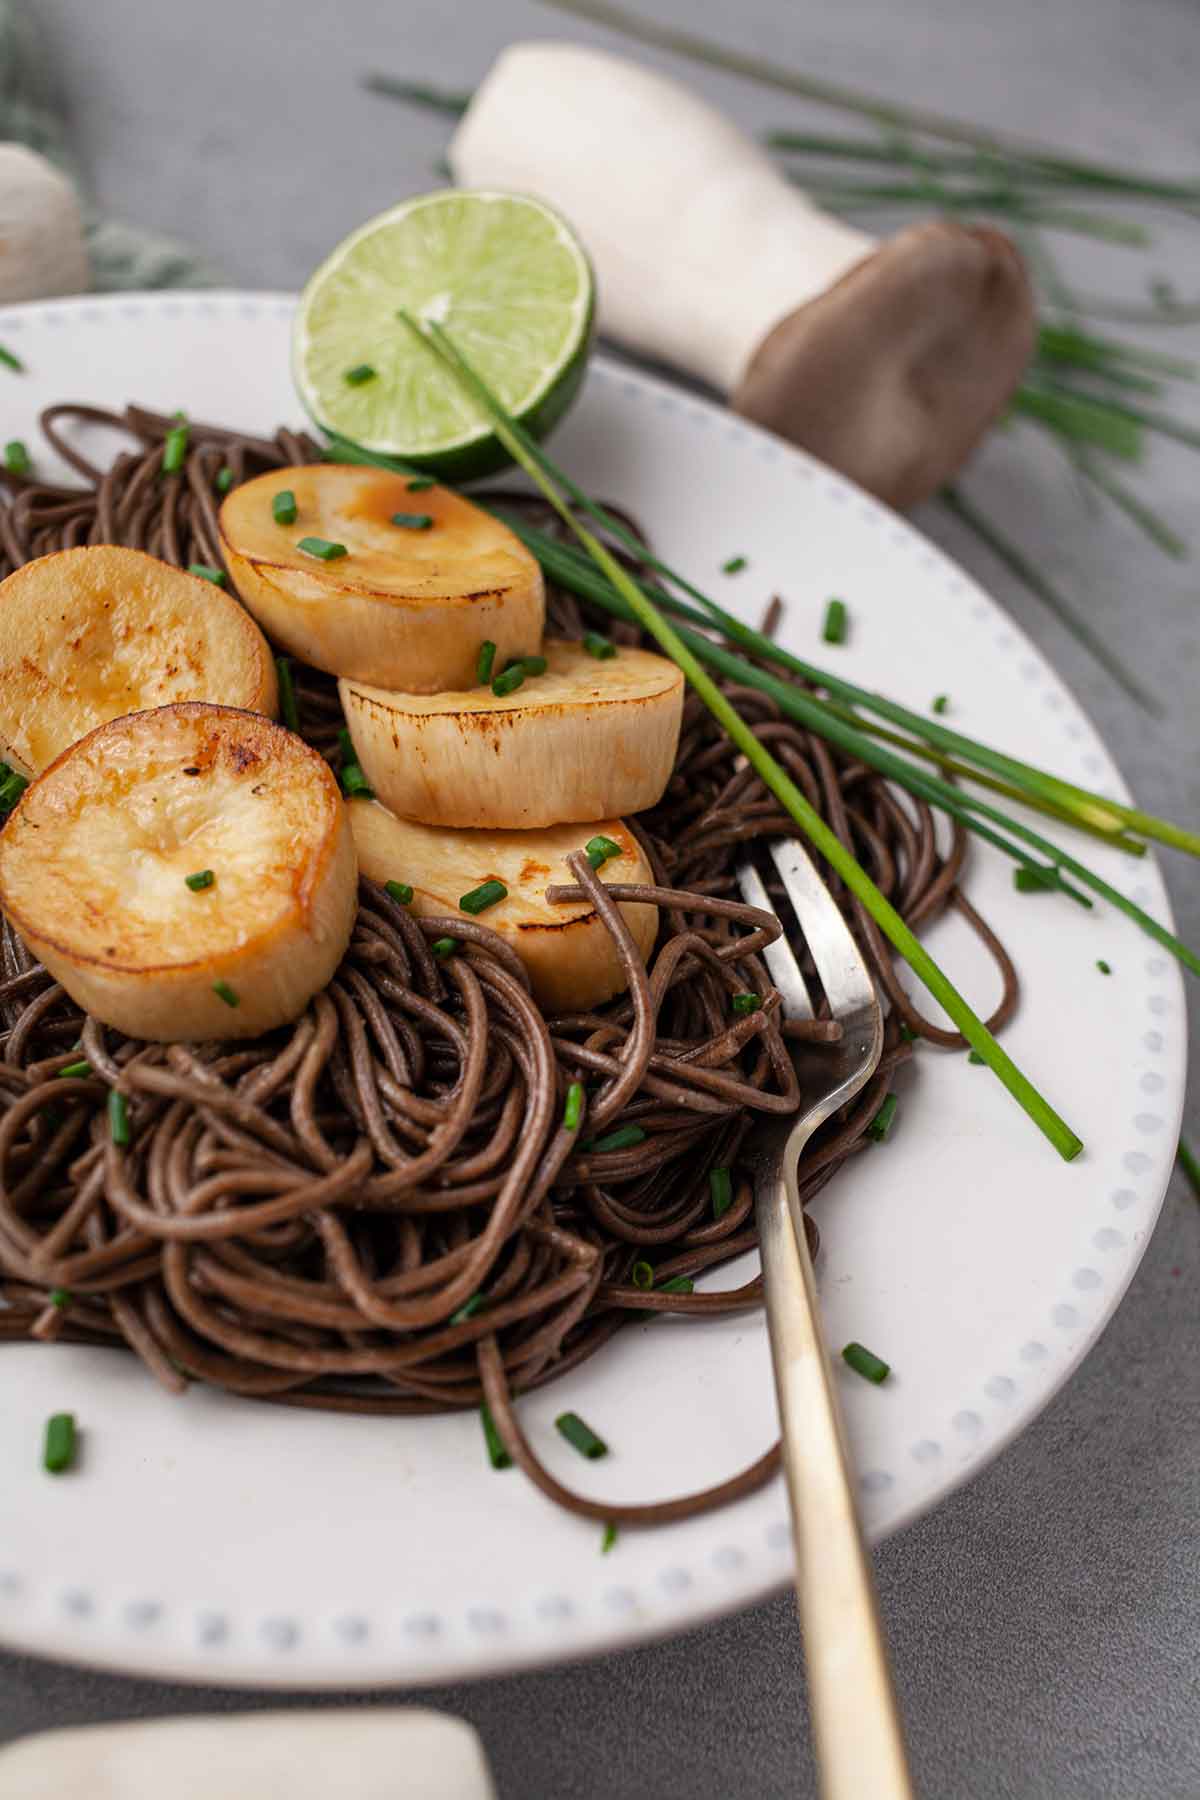 Miso and Lime Mushrooms with Soba Noodles vegetarian